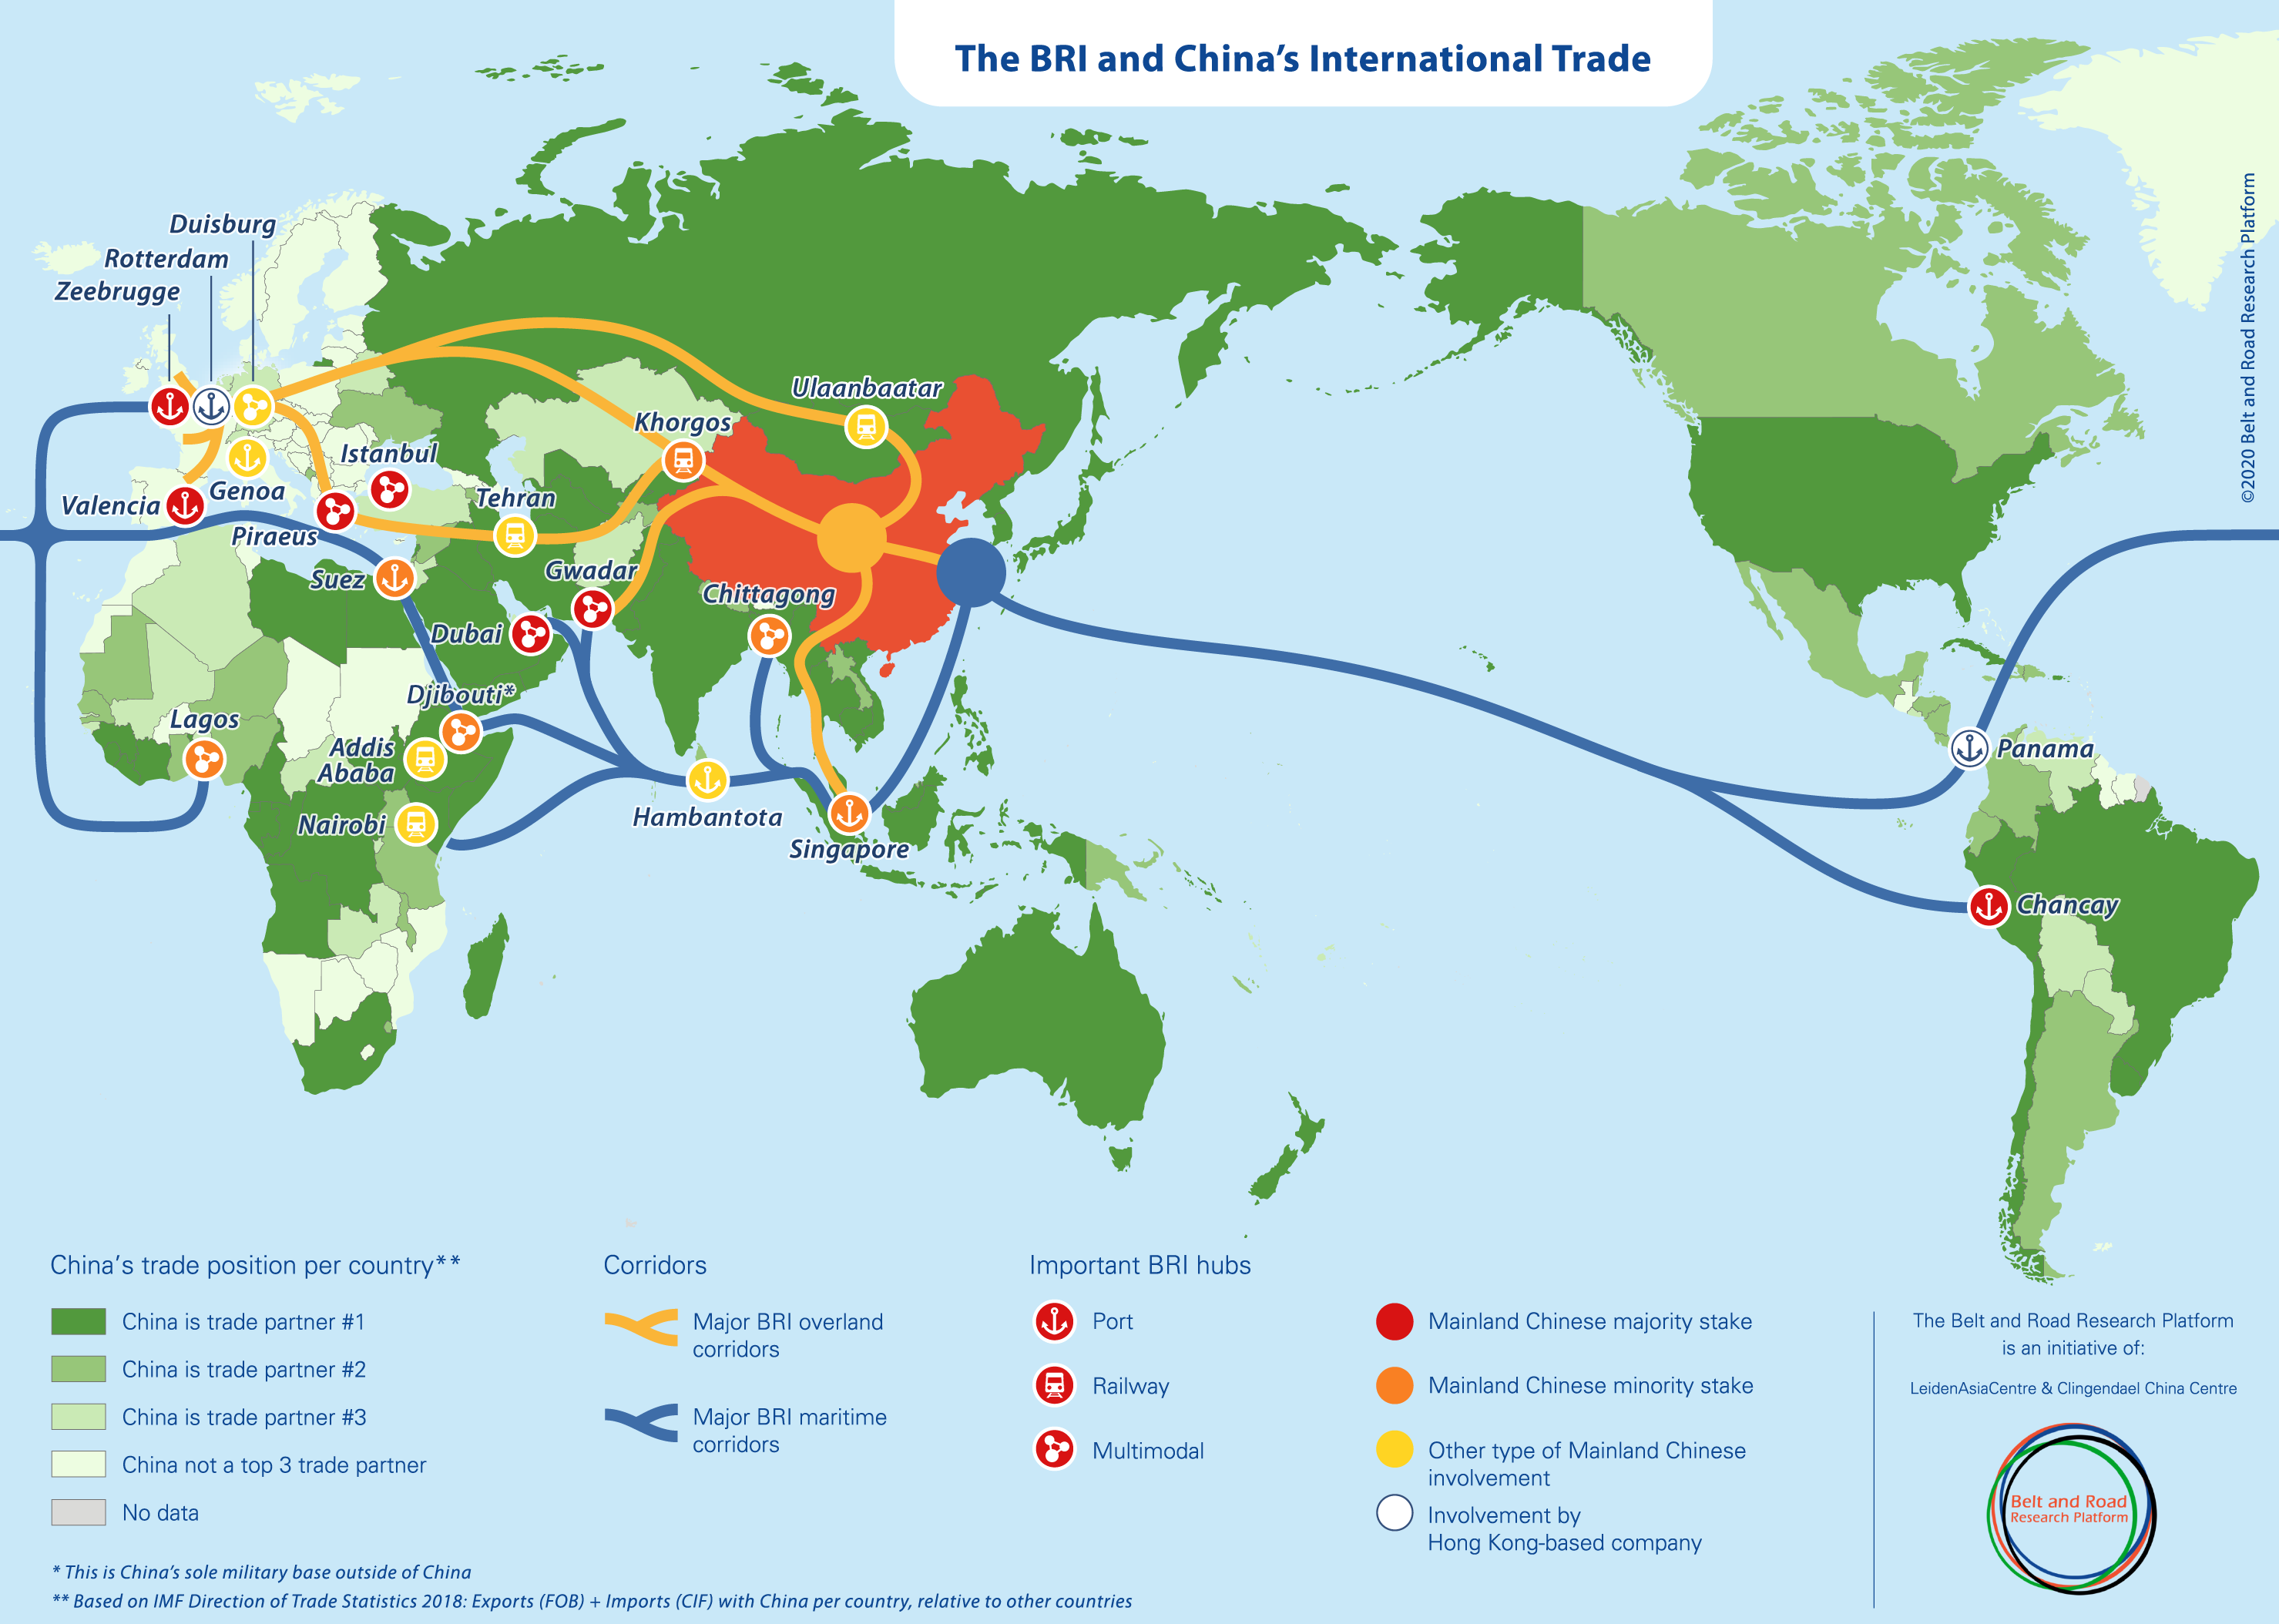 A detailed map of the Belt & Road Initiative showing railroads, oil and gas pipelines, and ports.